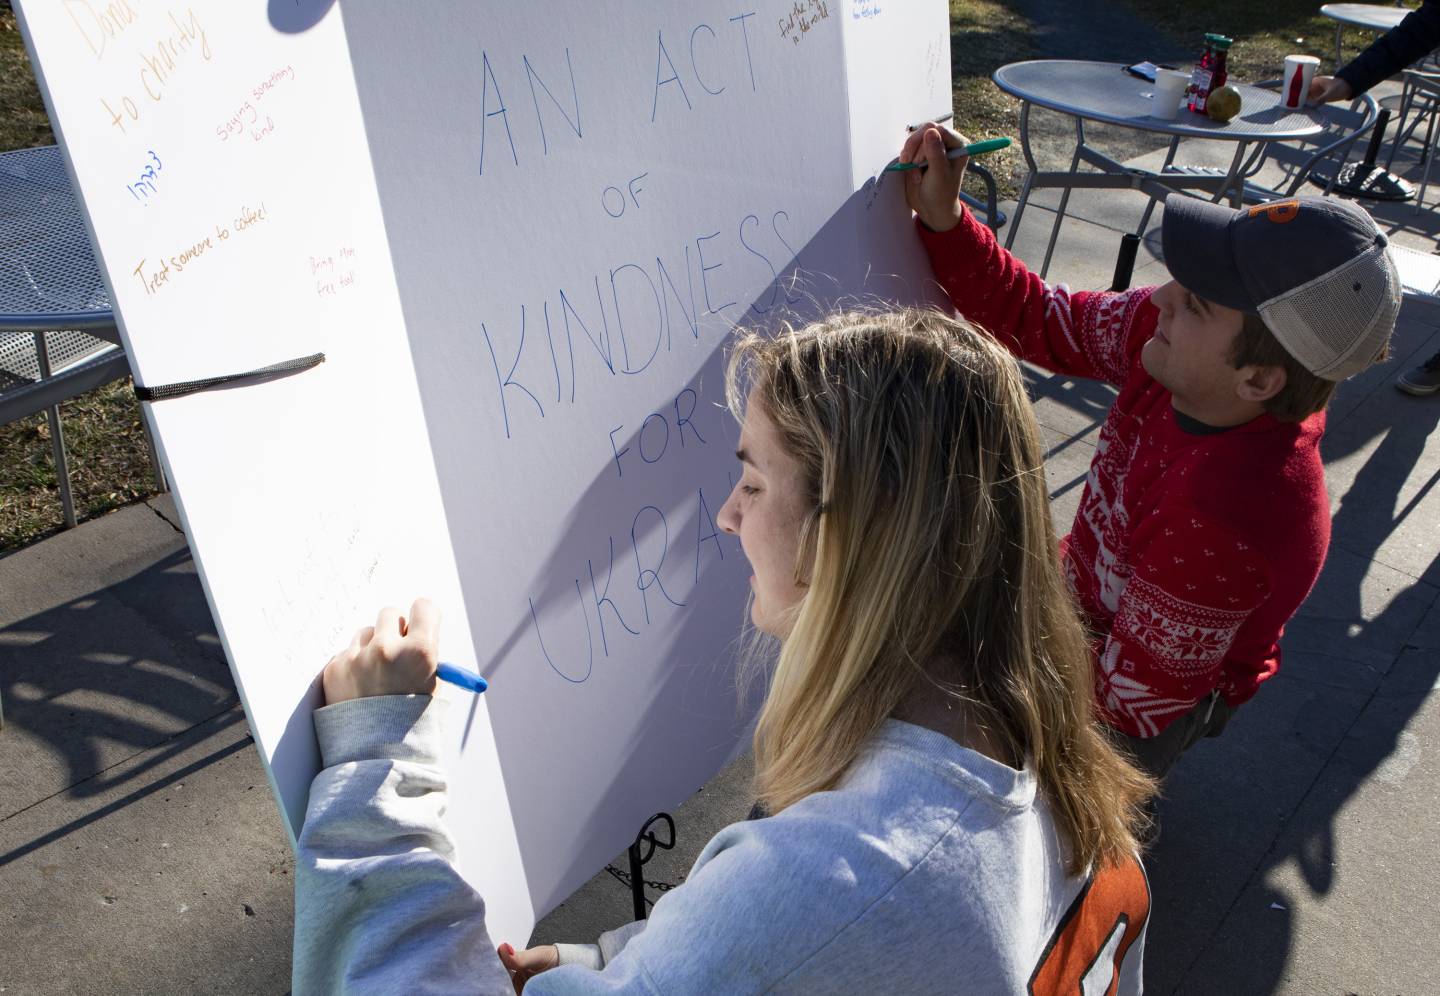 Two students sign up for an "act of kindess" on a large white board.